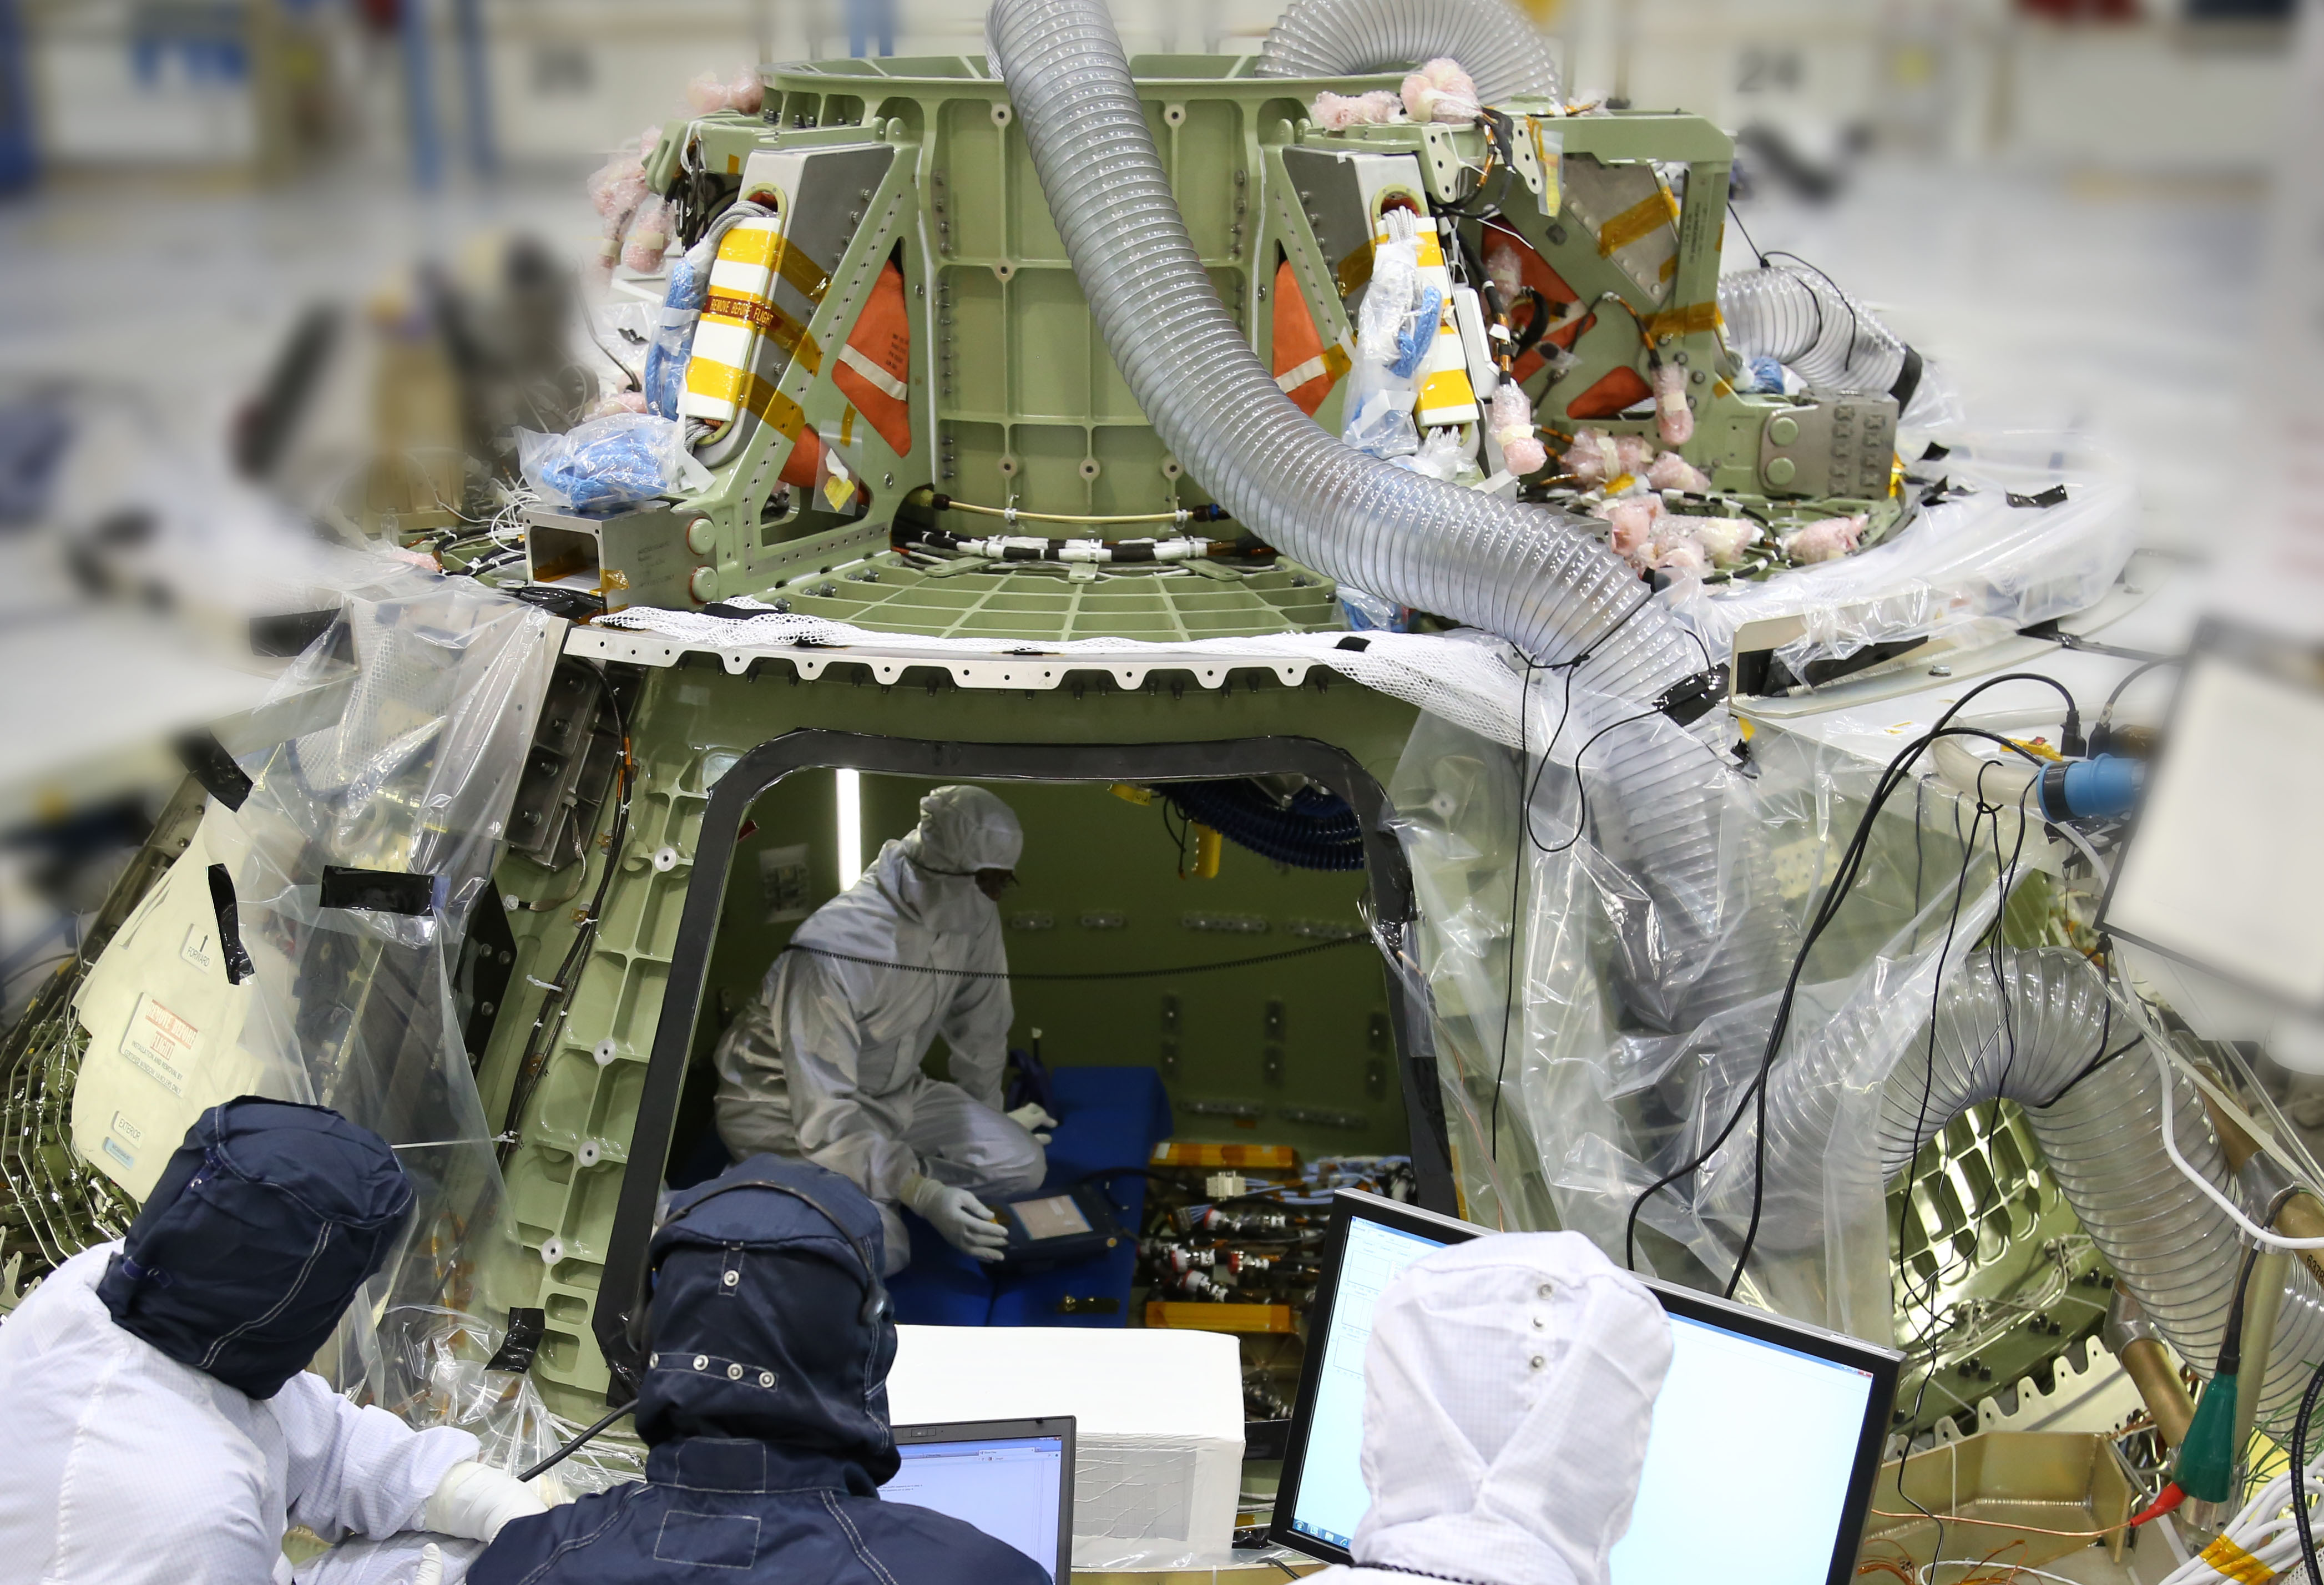 Technicians work inside the Orion crew module being built at Kennedy Space Center to prepare it for its first power on. Turning the avionics system inside the capsule on for the first time marks a major milestone in Orion’s final year of preparations before its first mission, Exploration Flight Test Photo Credit: Lockheed Martin